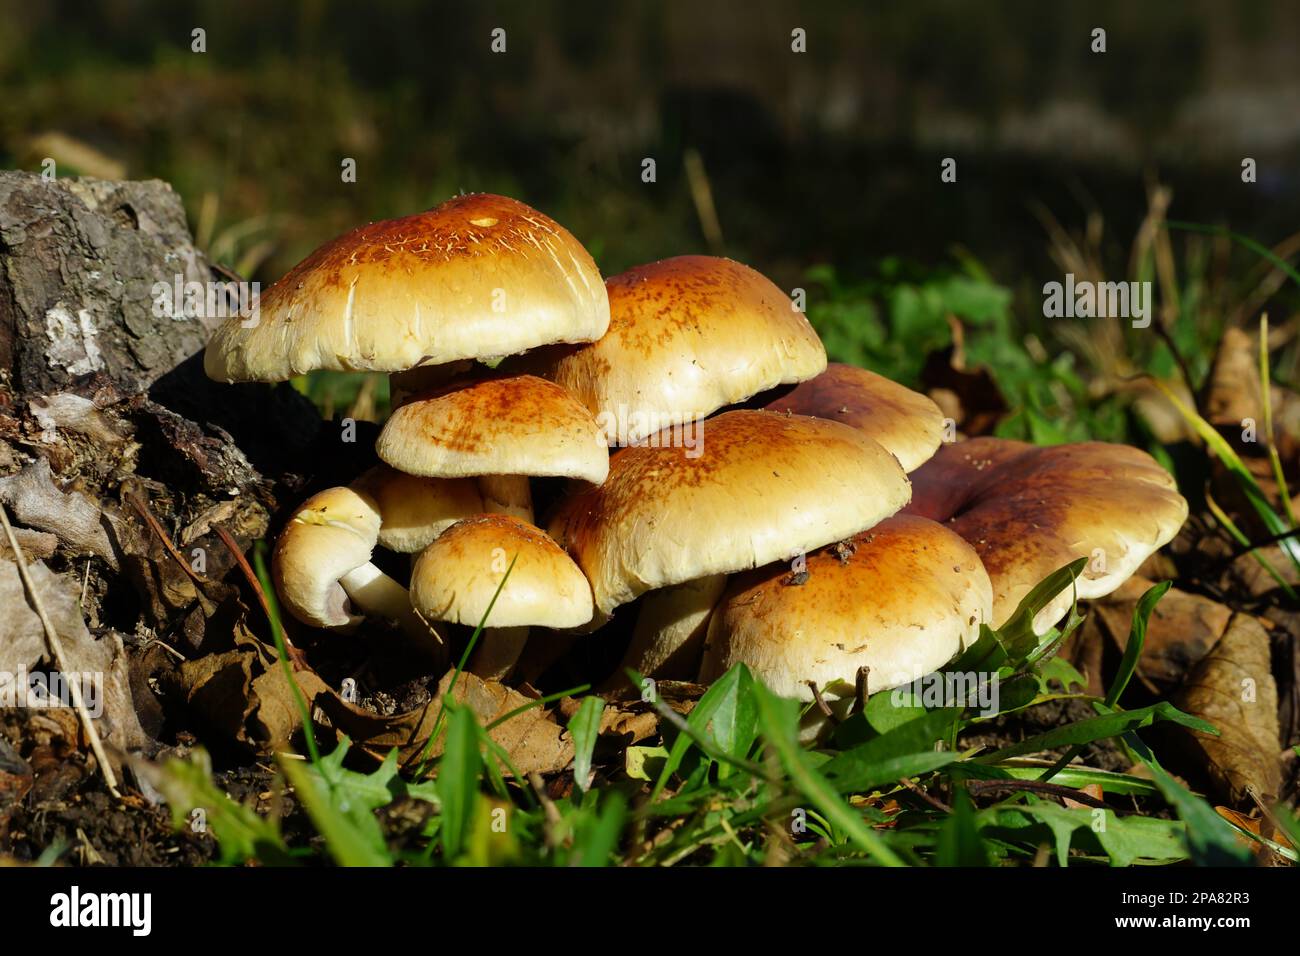 A pile of fresh forest mushrooms next to an old stump Stock Photo